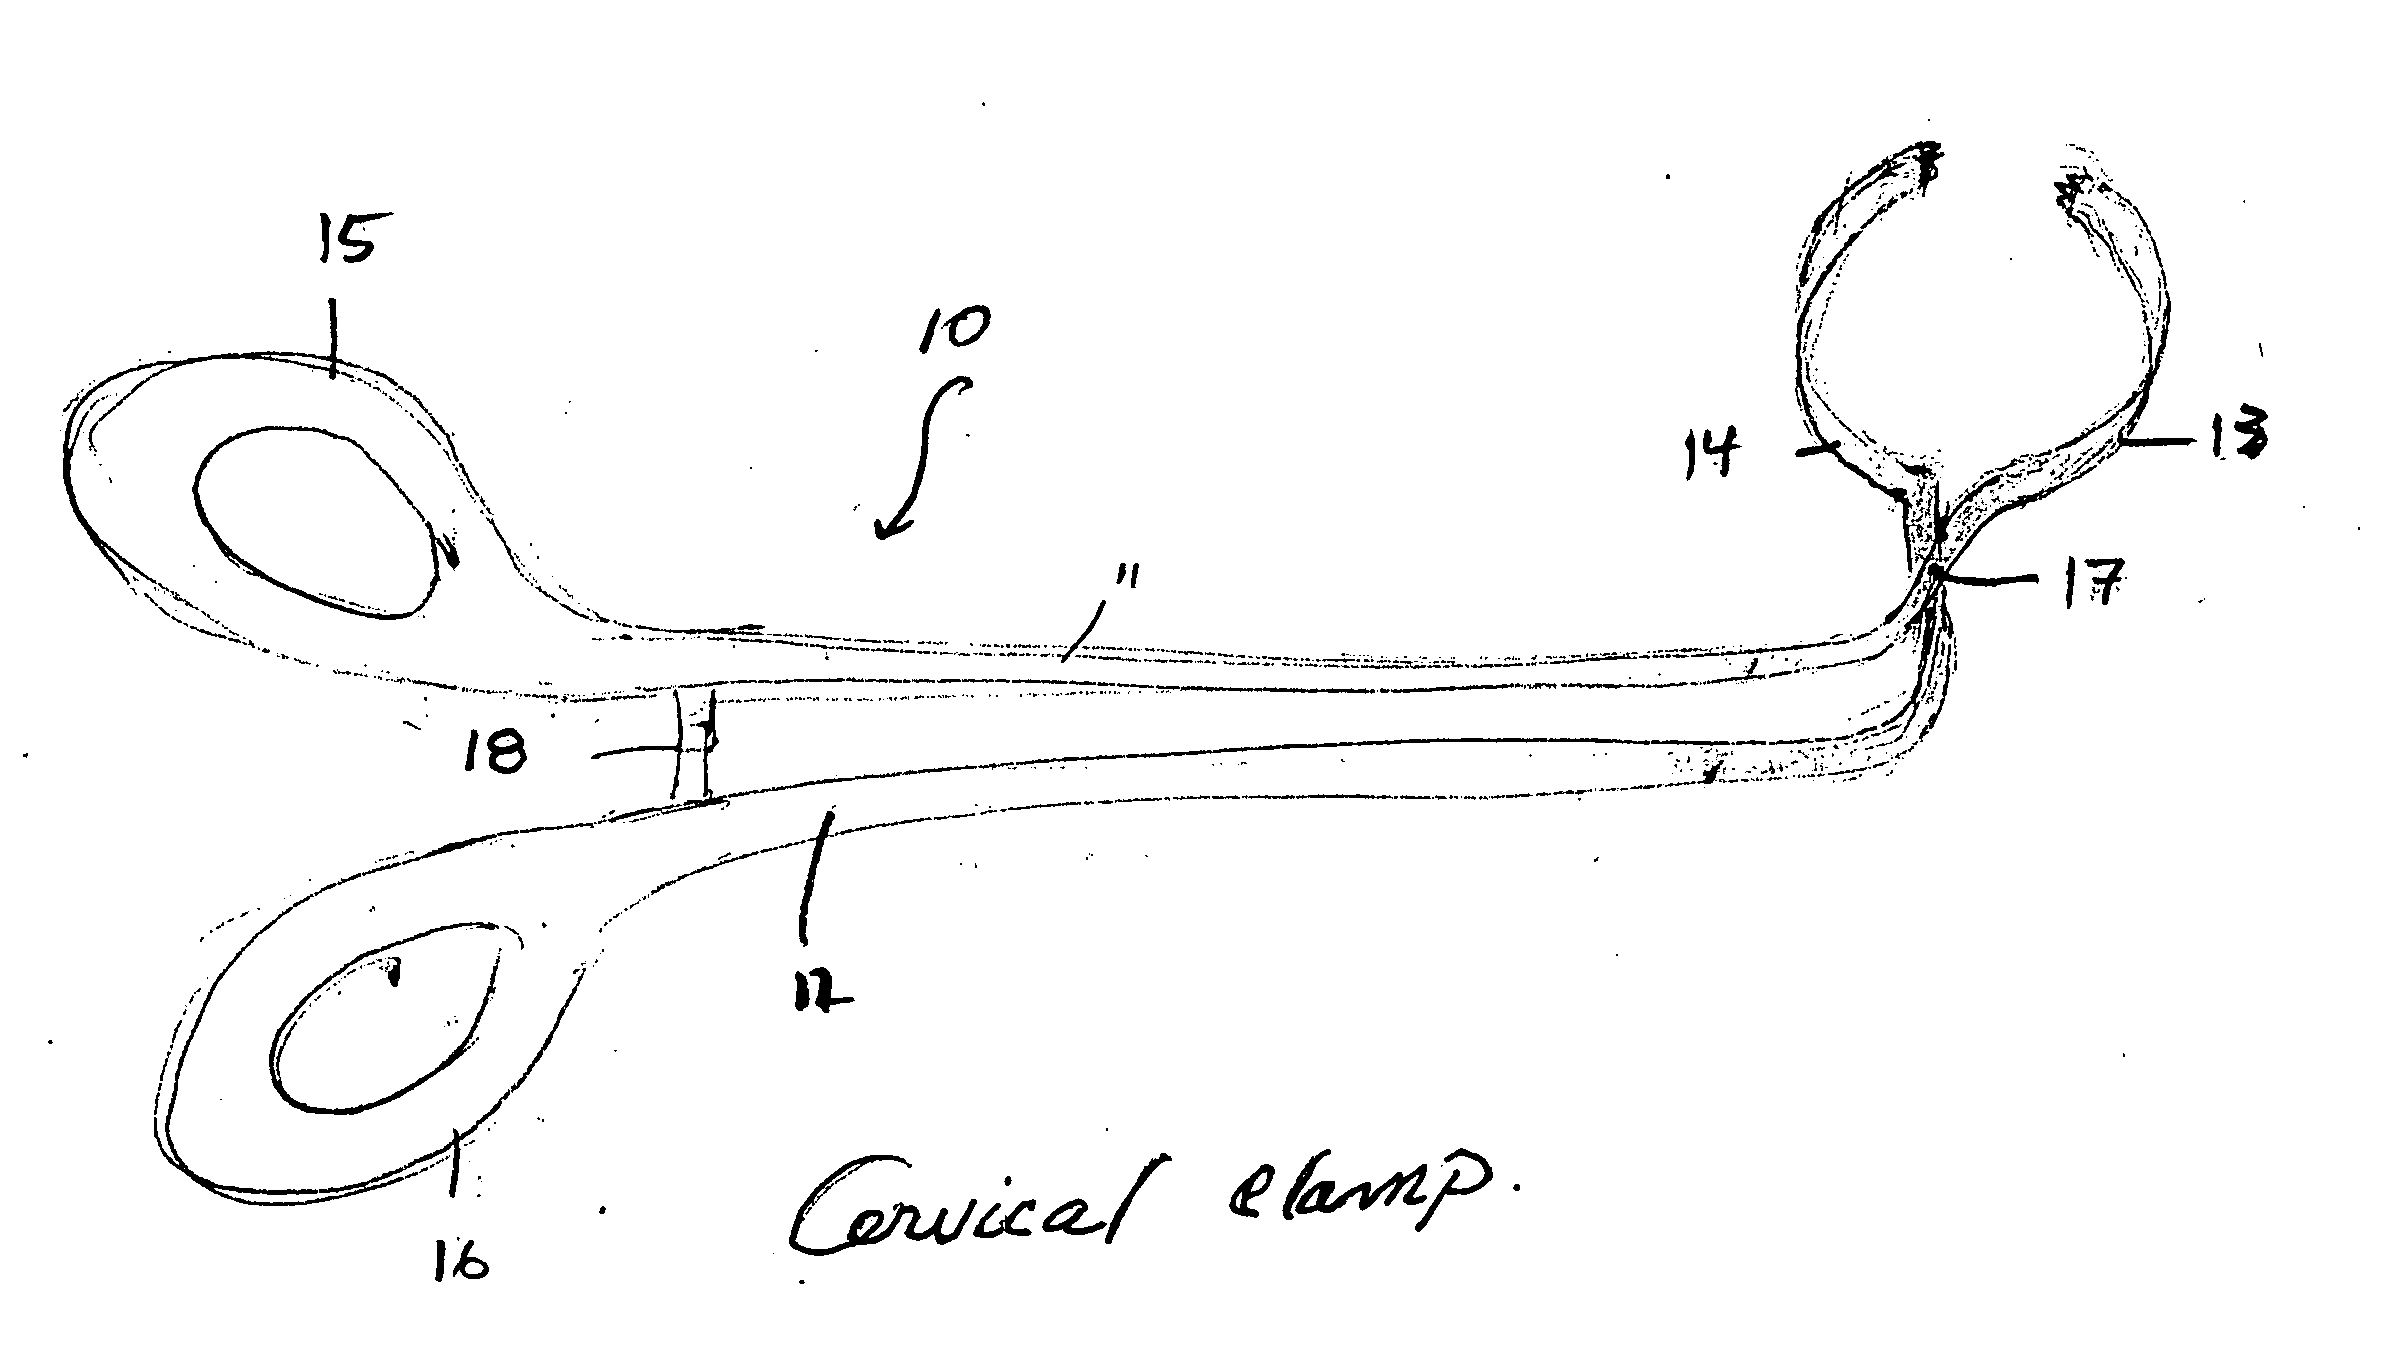 Device for sealing a cervical canal